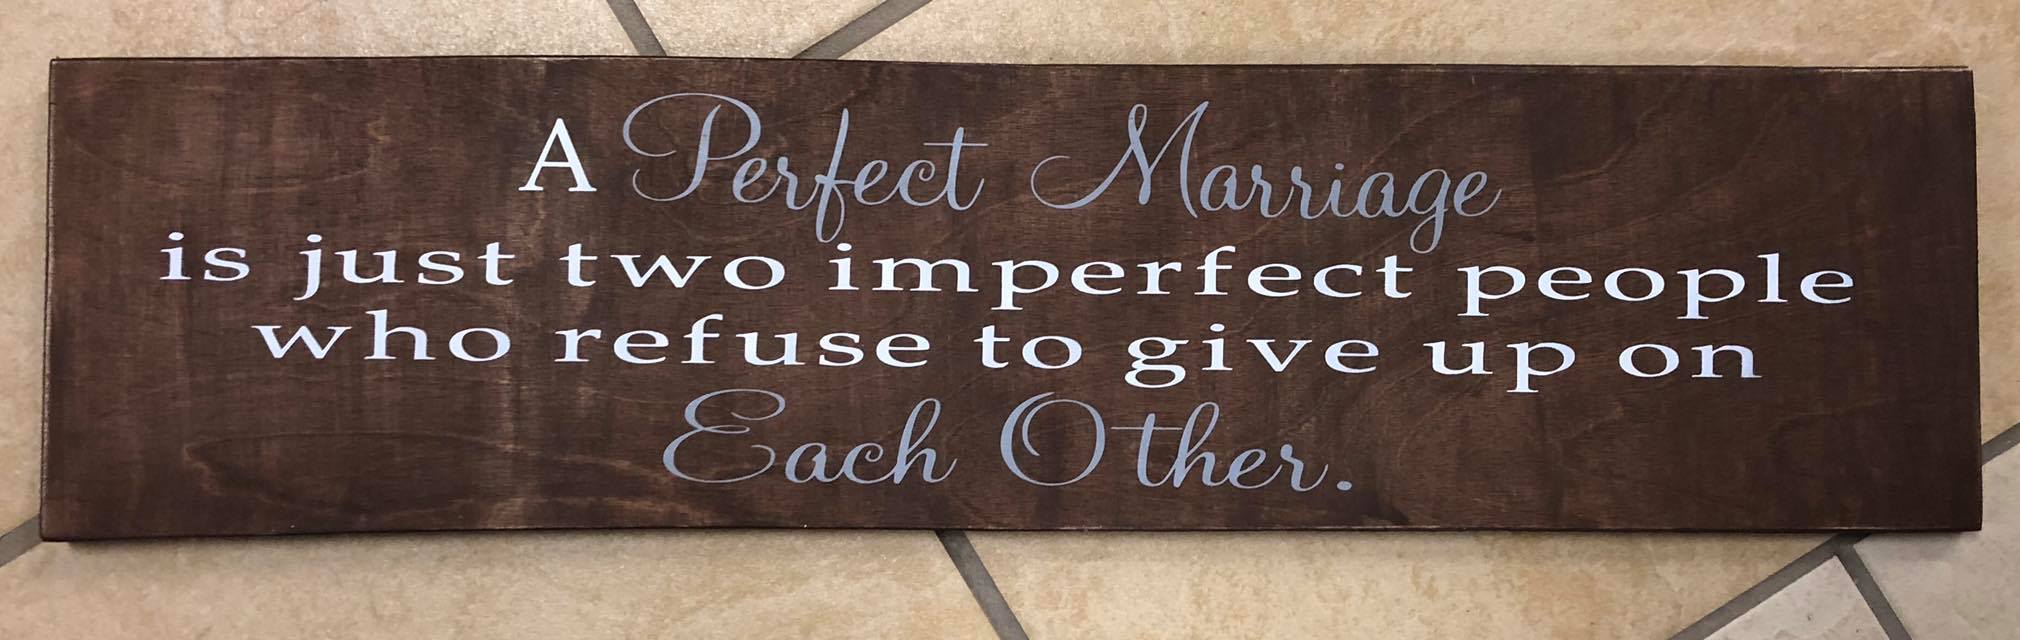 perfect marriage 6